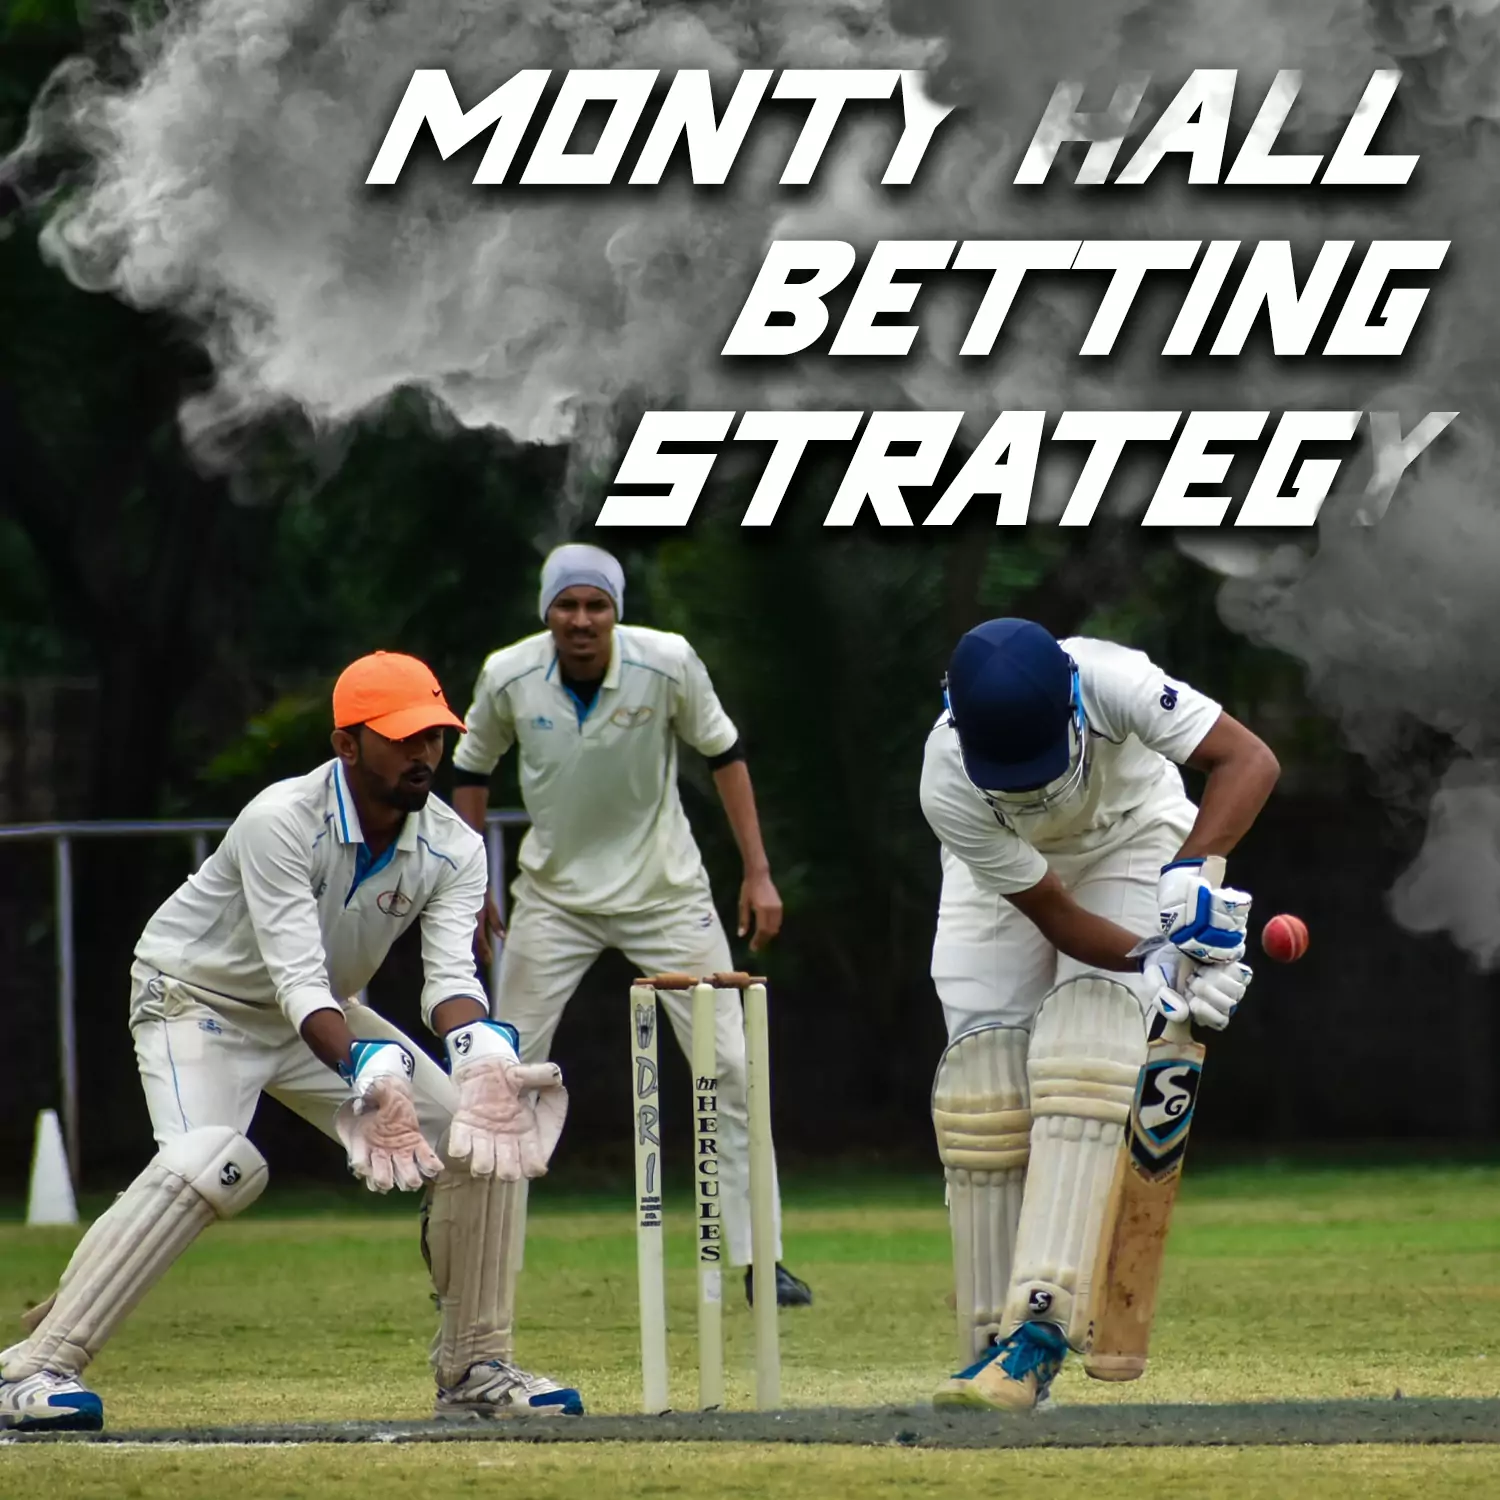 The strategy Monty Hall Paradox is effectively used for betting on cricket matches.